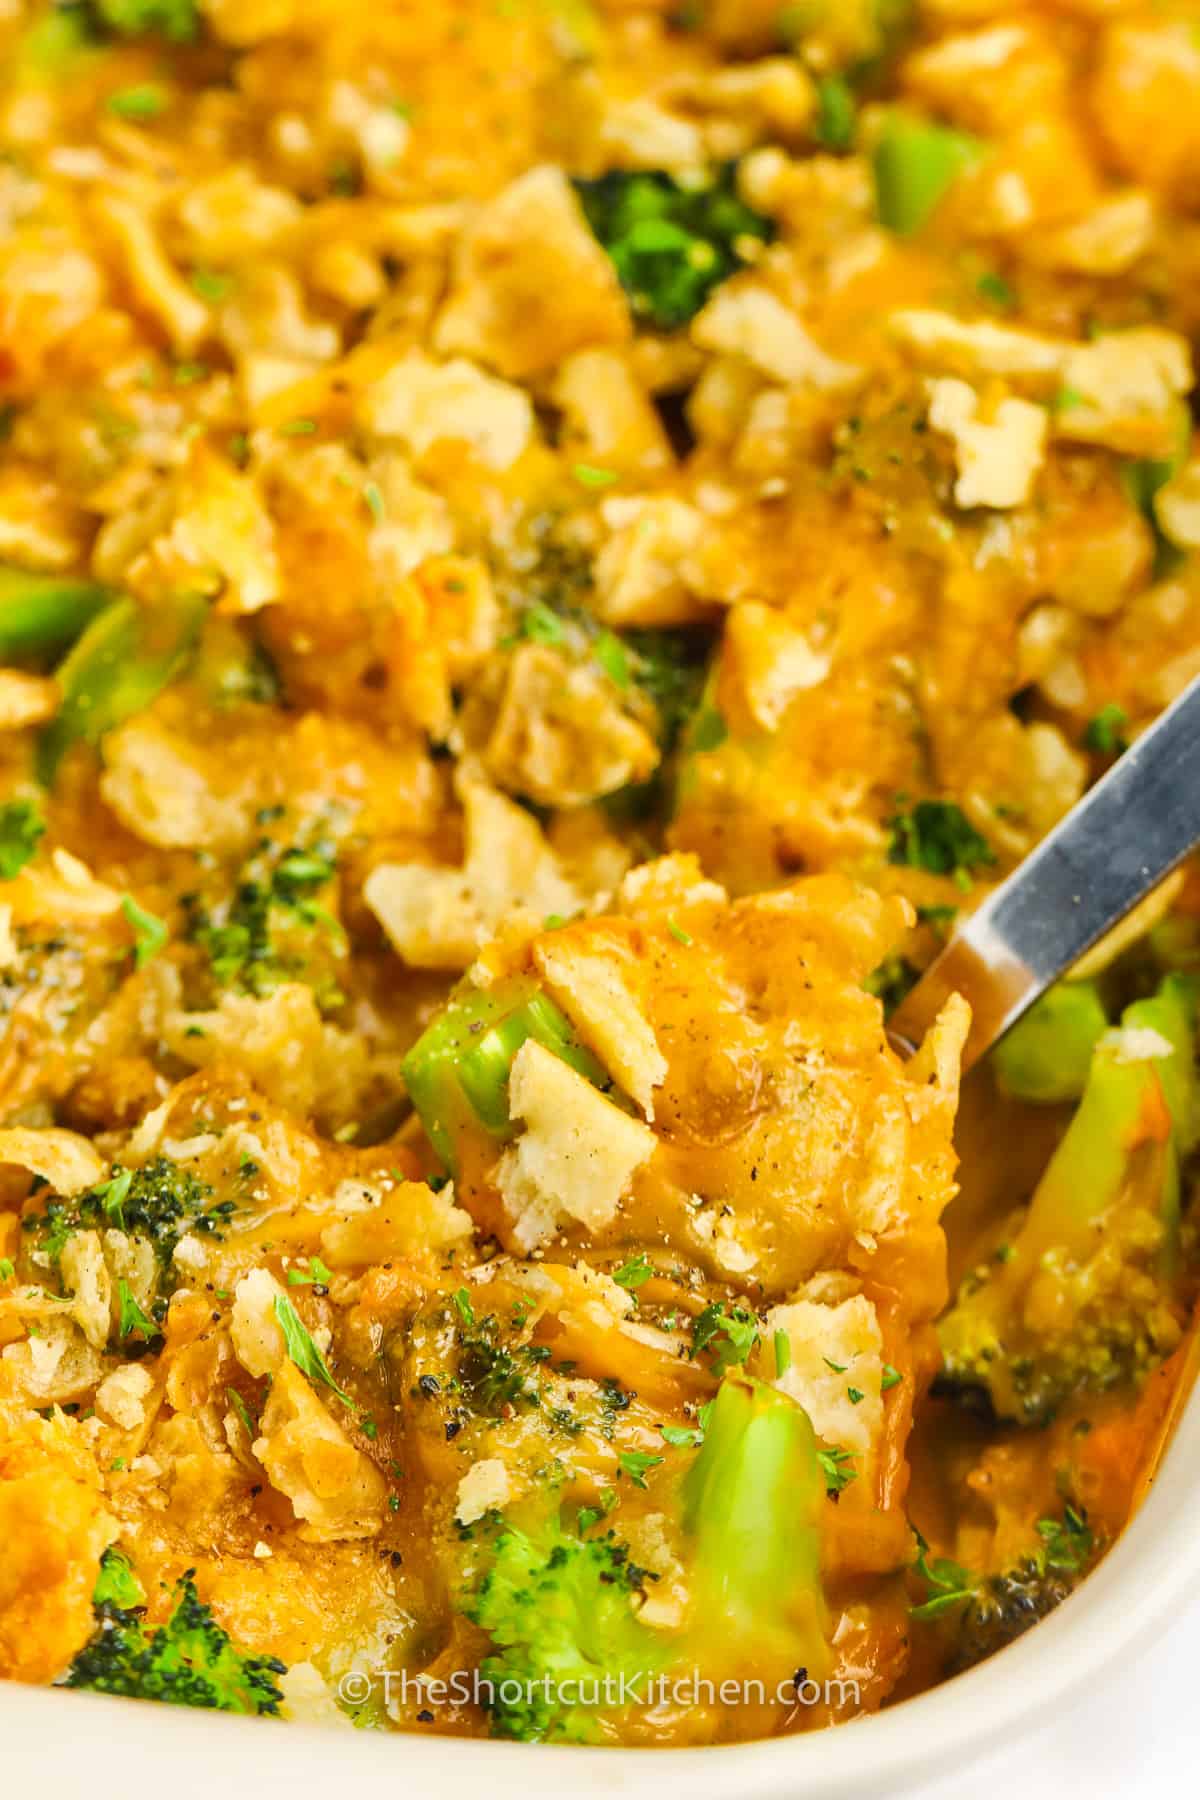 taking a spoonful of Baked Broccoli and Cheese Casserole from the dish